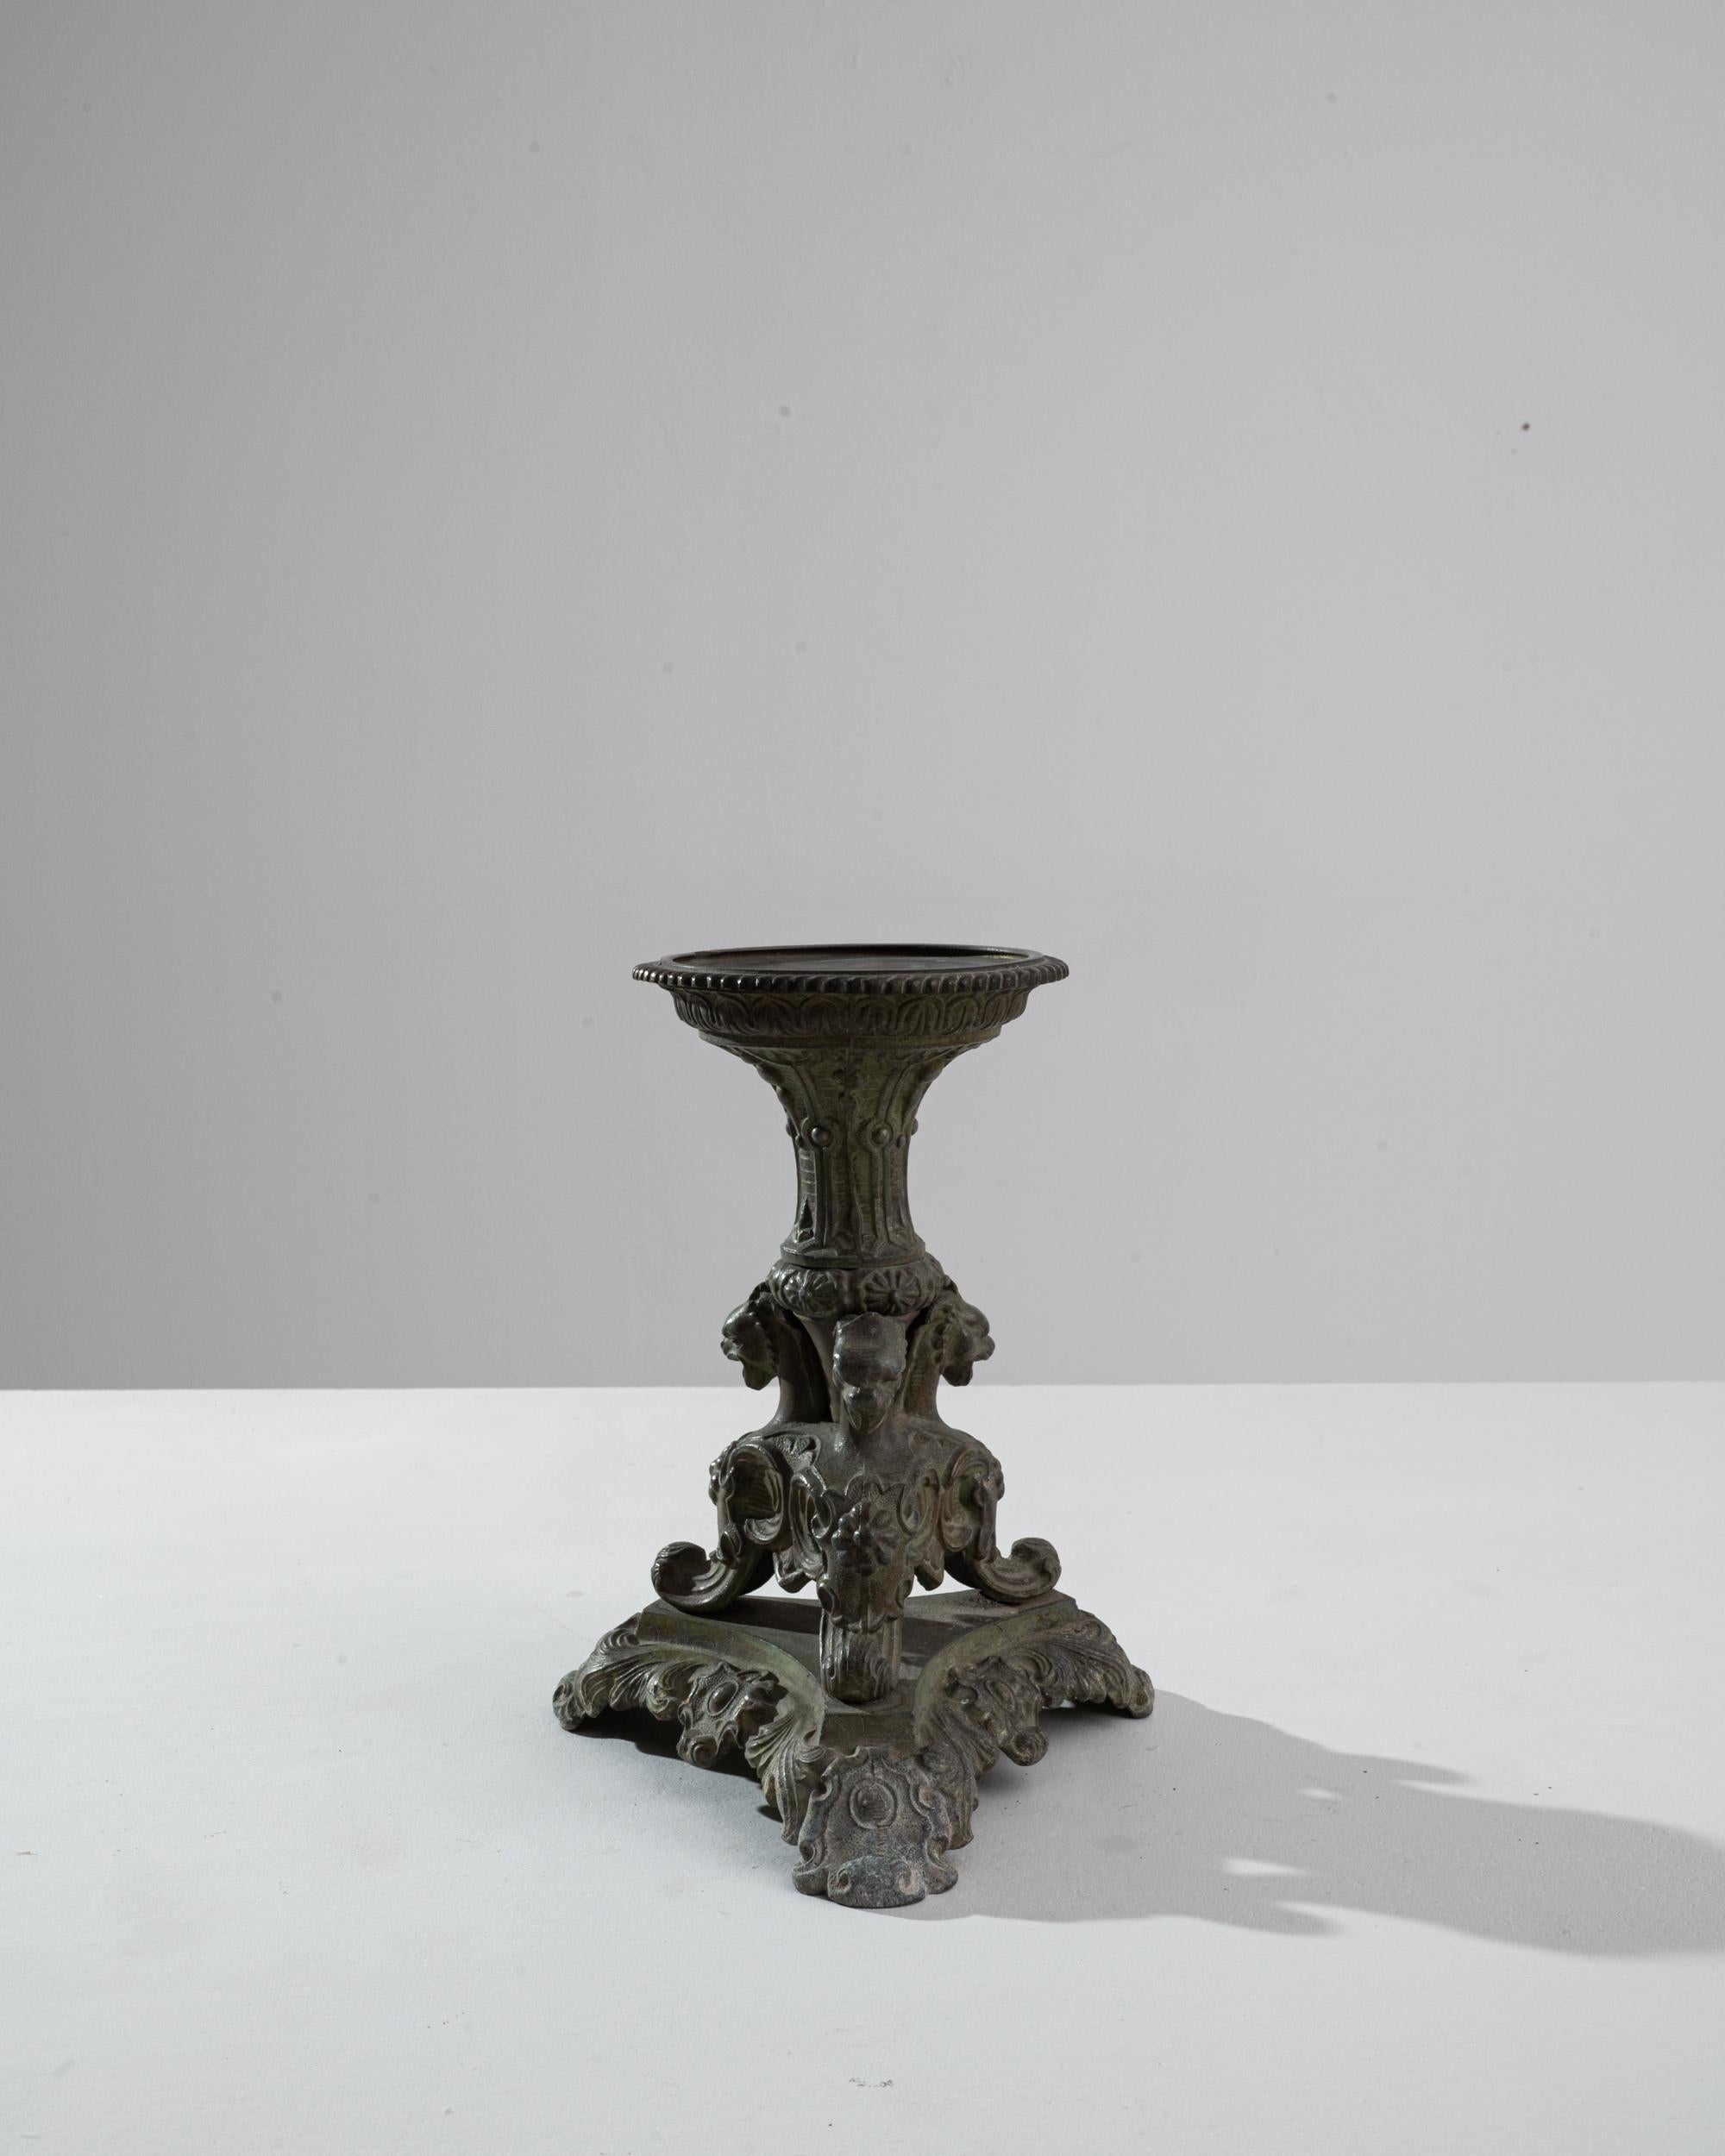 A metal candlestick created in 1900s France. This lavishly detailed candlestick made from cast iron emits a solemn and engaging aura. Mysterious creatures, painstakingly detailed, emerge from each end of its tripod of legs, reinforcing the neo